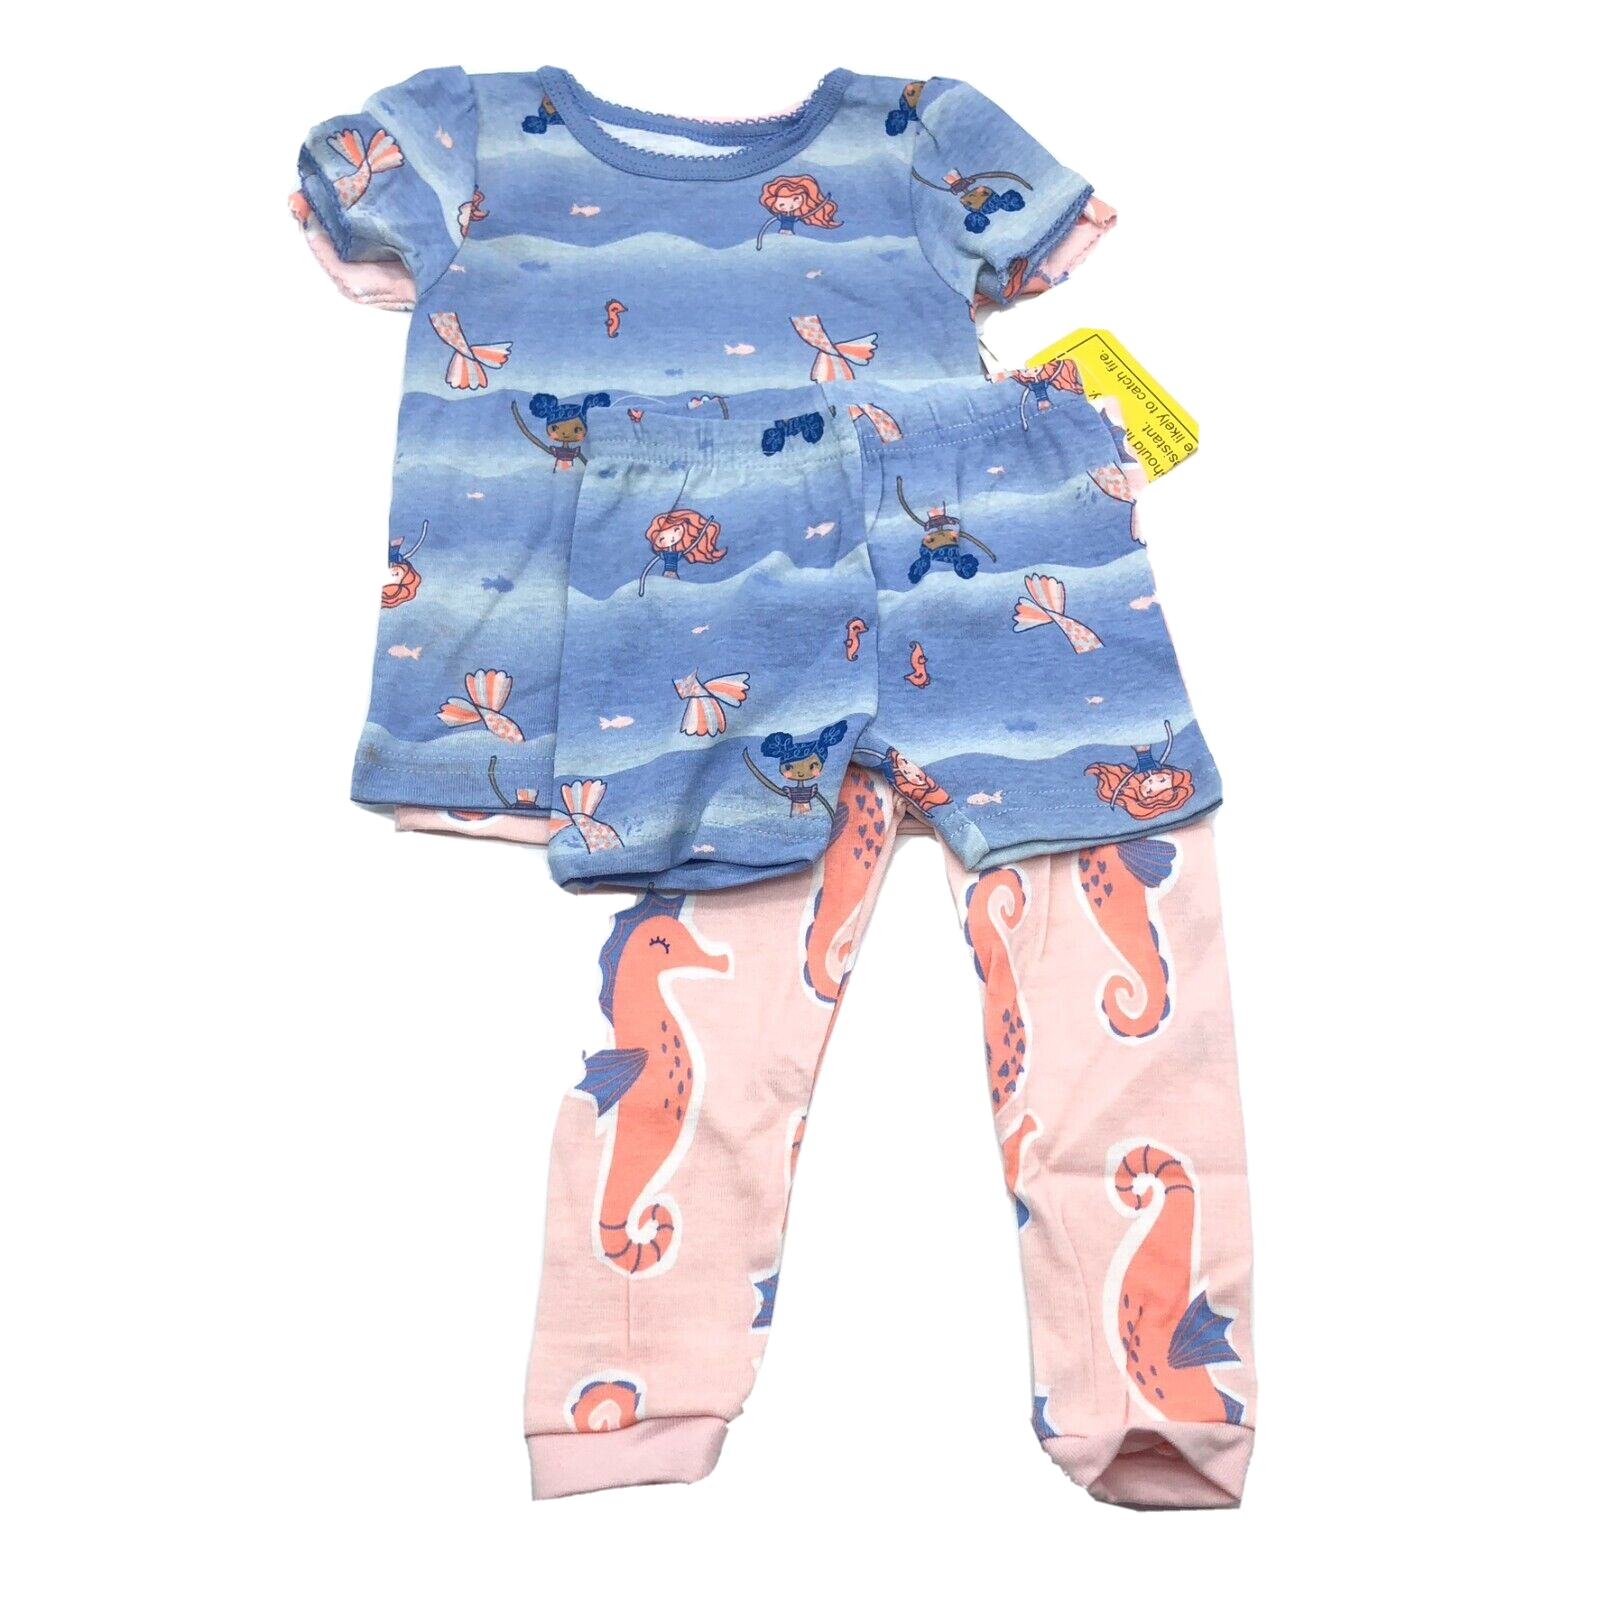 Primary image for Just One You Carters Baby Girls Outfits 4 Pc Seahorse Mermaid Pink Purple 9M